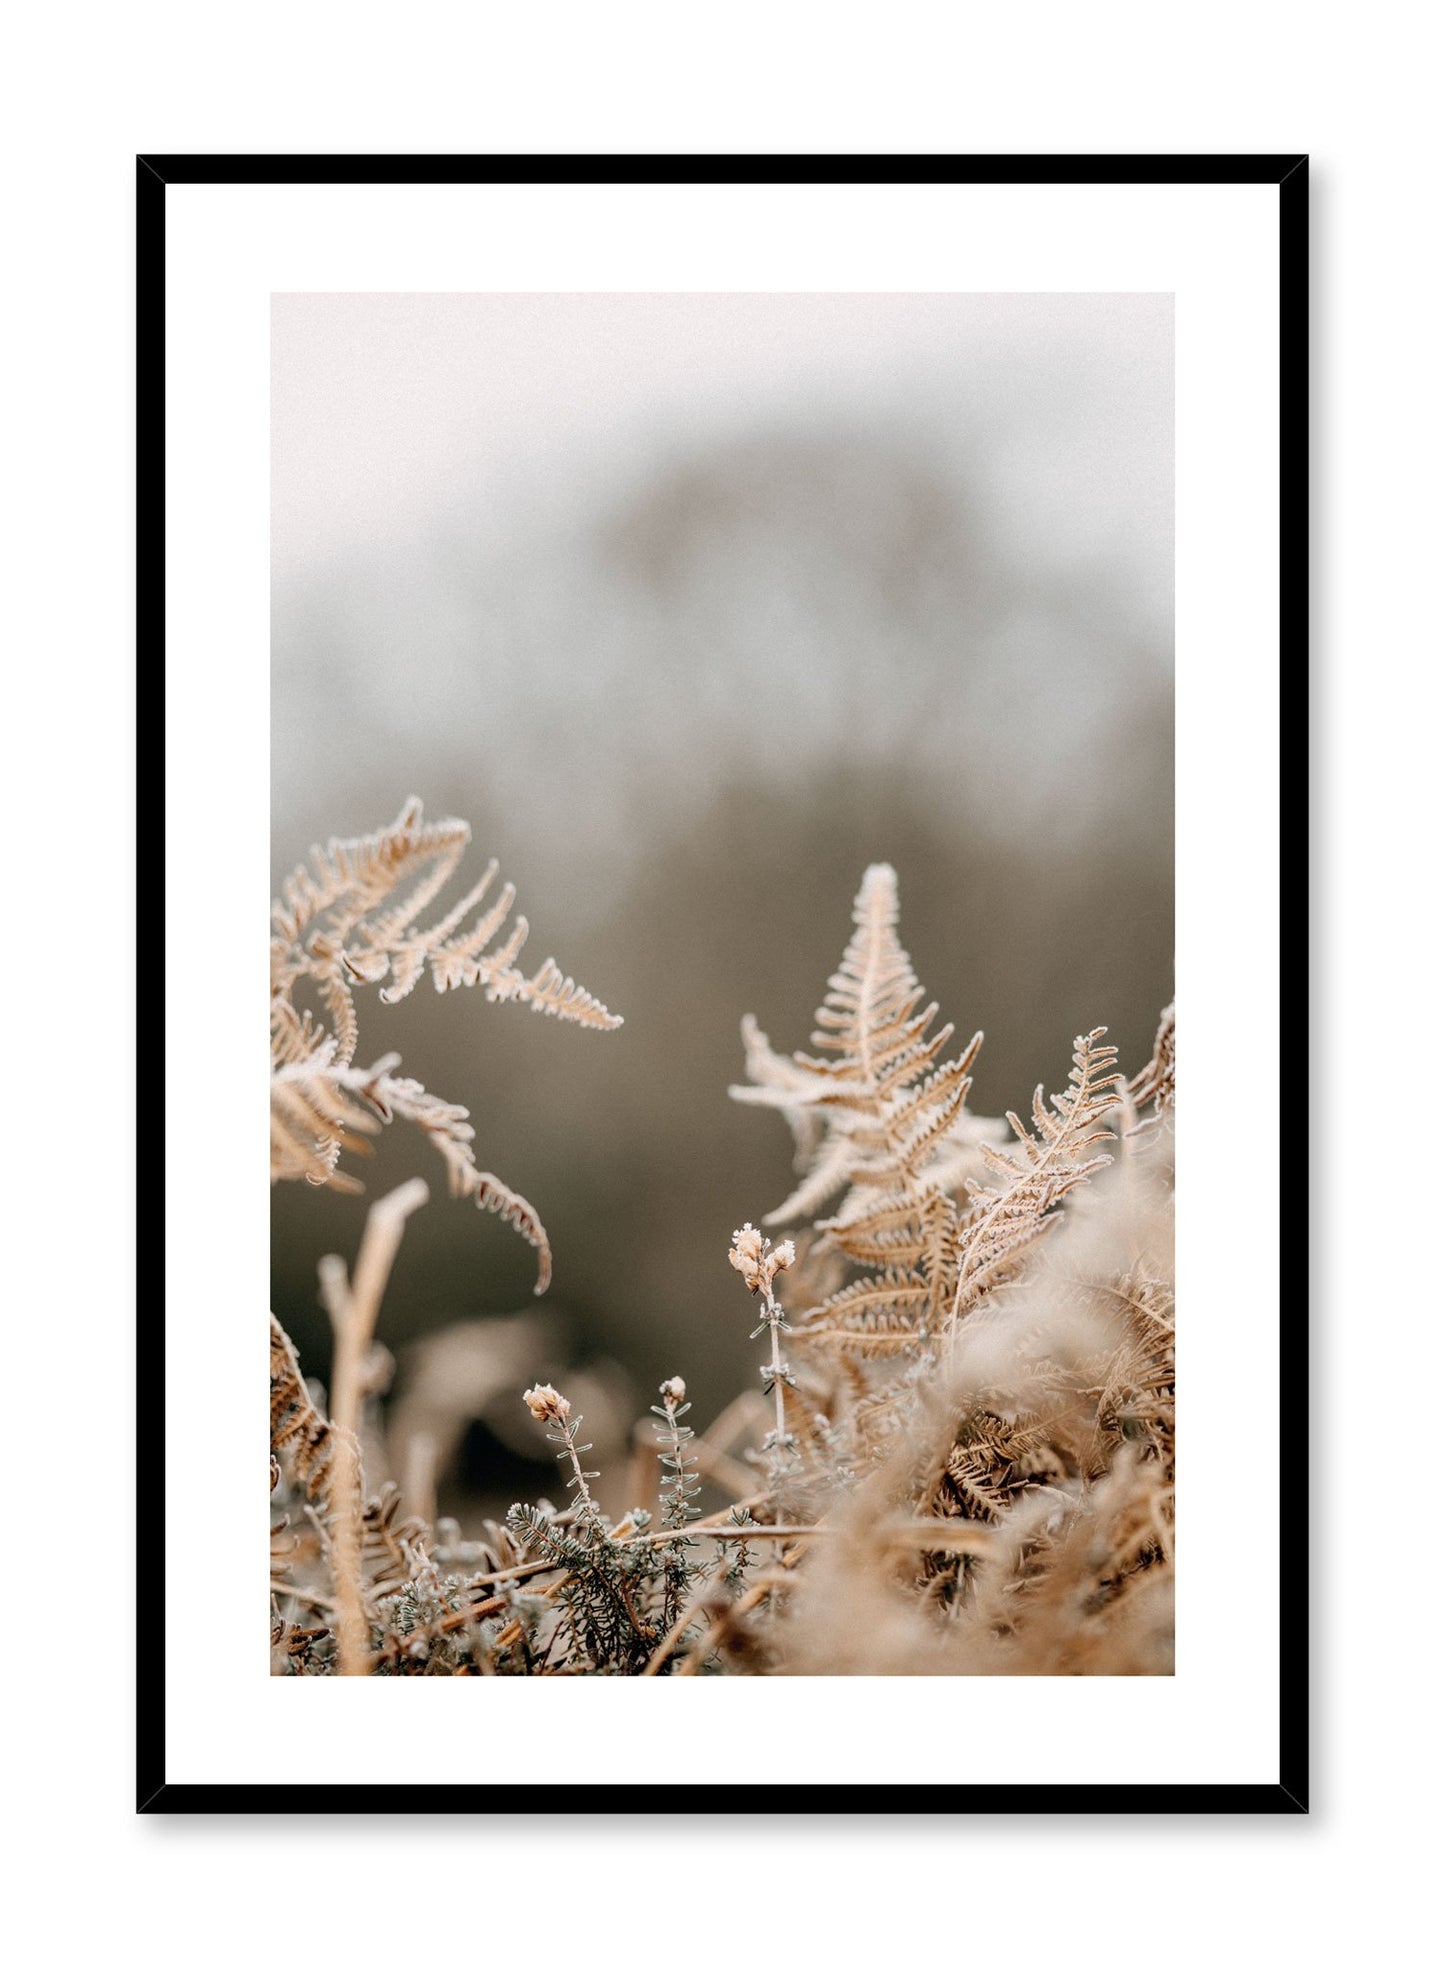 "Chilly Conifer" is a botanical photography poster by Opposite Wall of beige conifer or pine tree leaves in a forest. Photographed by English nature photographer Annie Spratt.